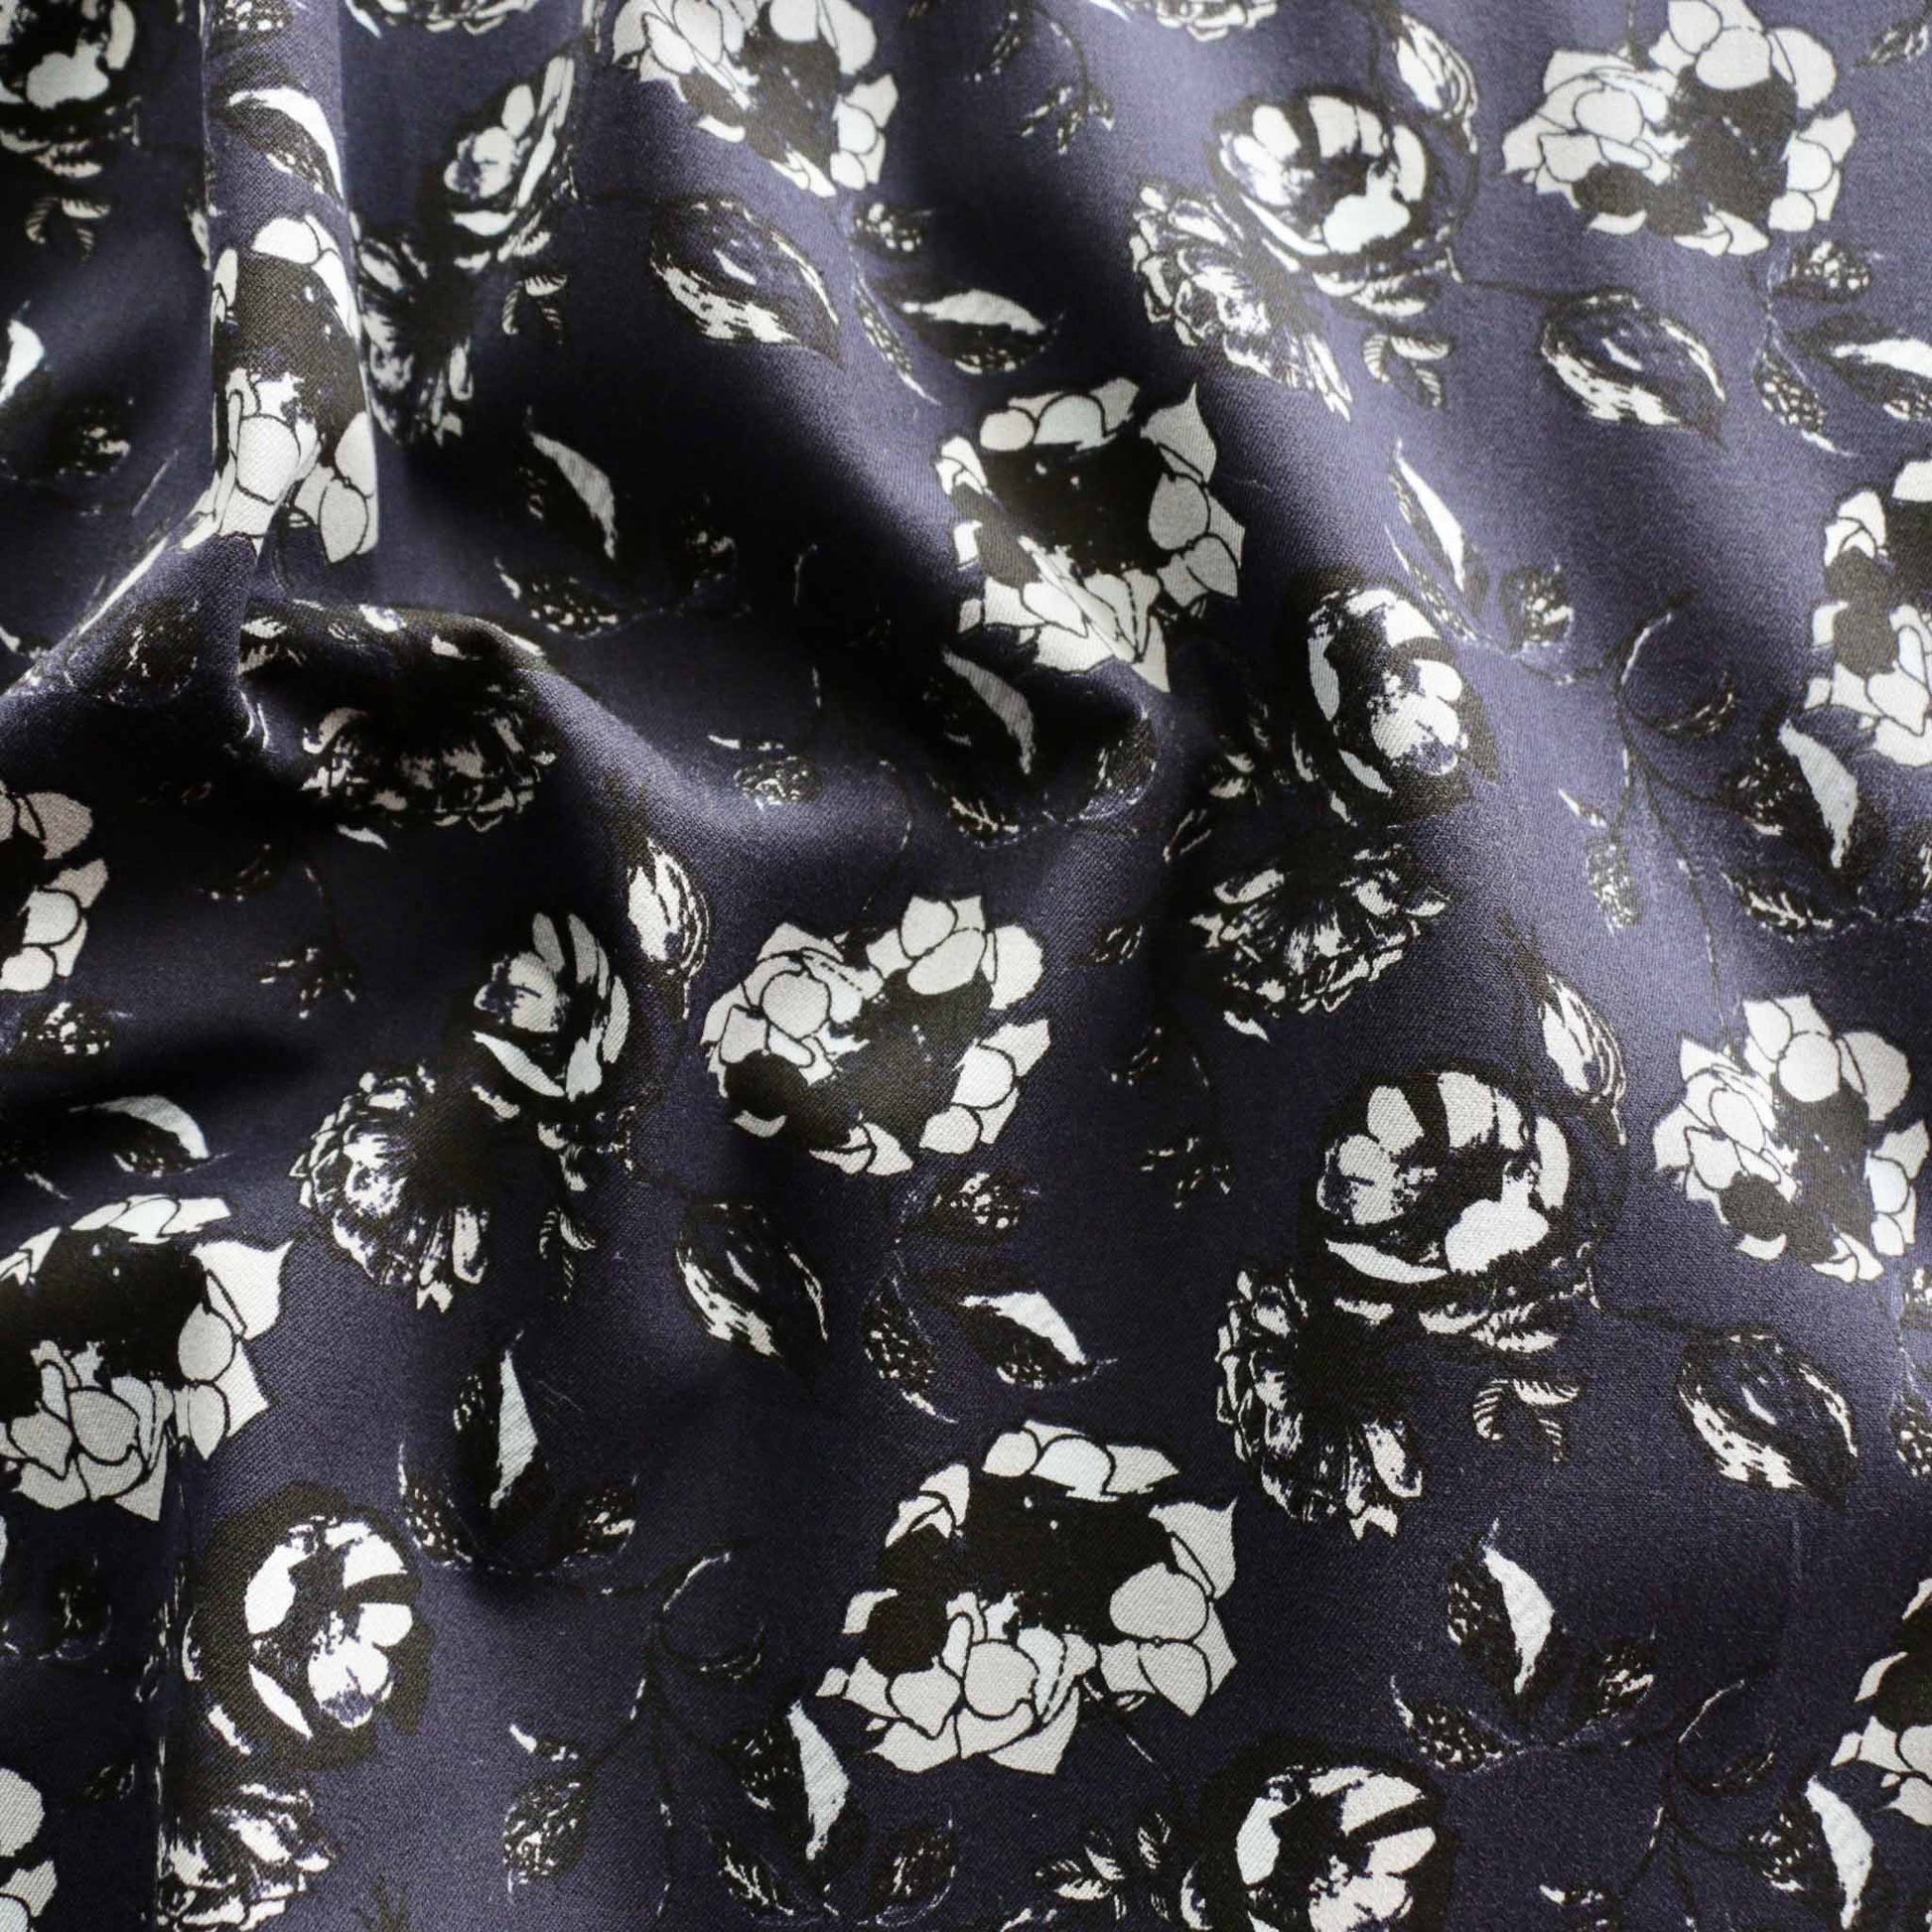 white and black floral print on navy blue cotton sateen dress fabric